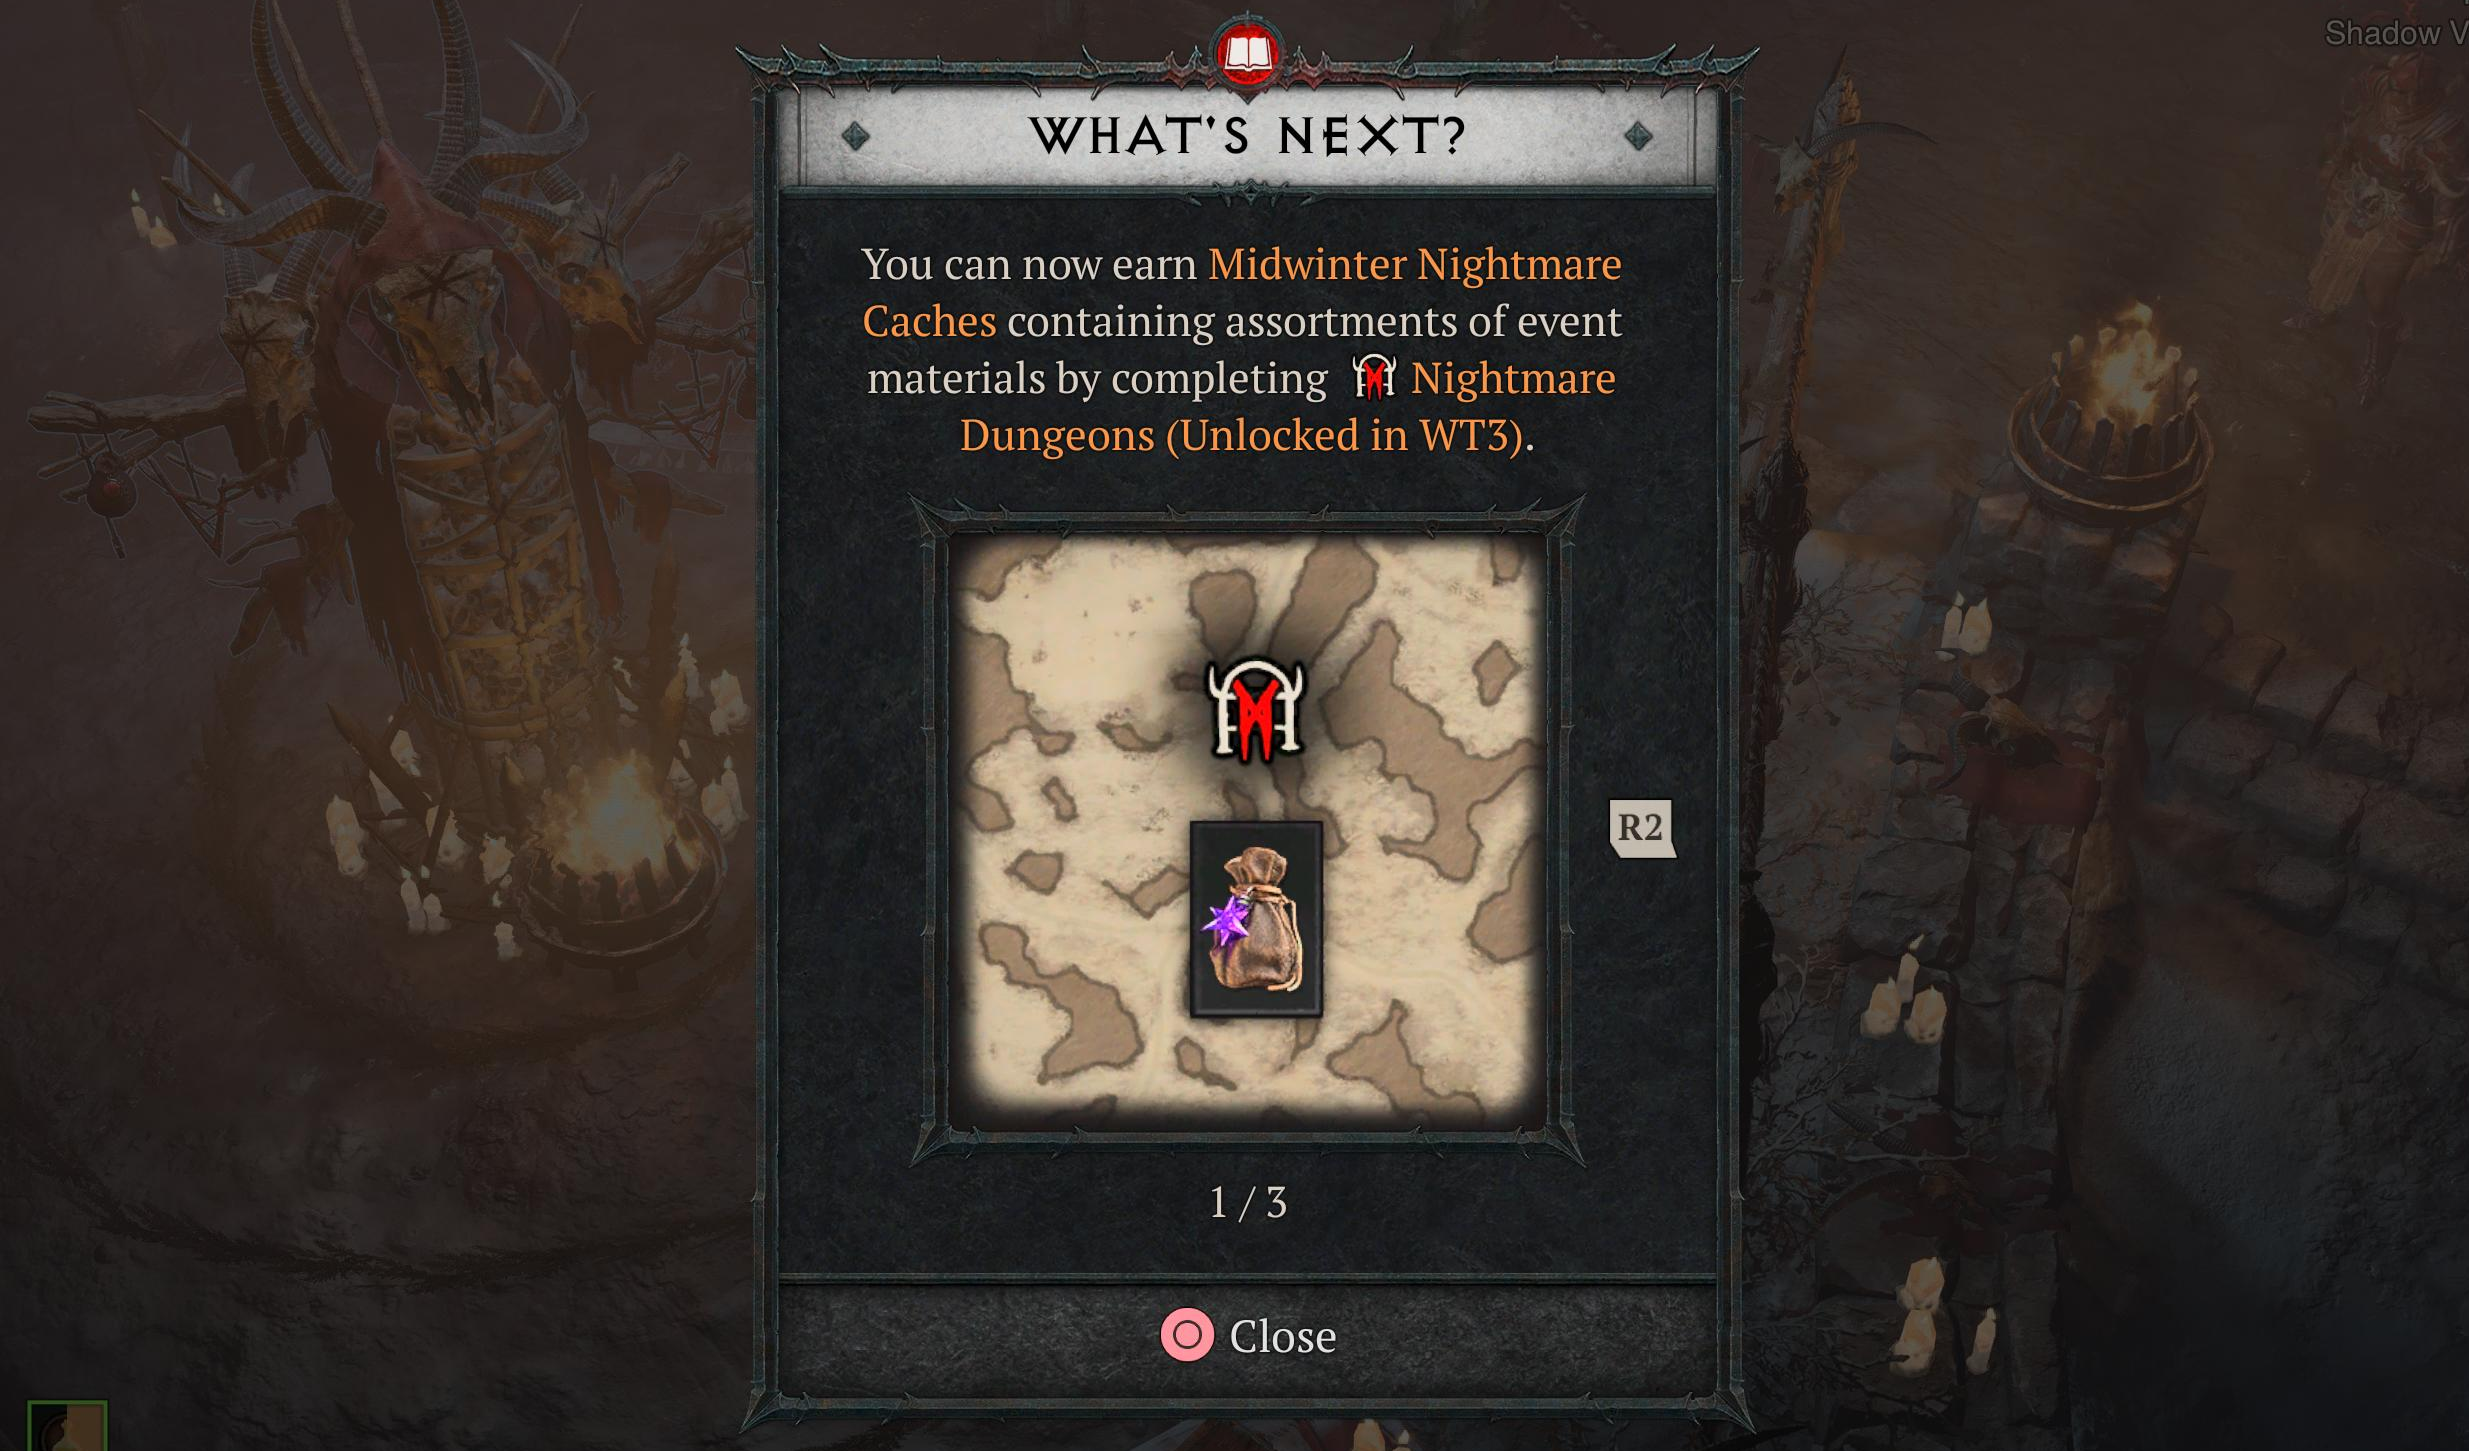 Earn Midwinter Nightmare Caches from Nightmare Dungeons